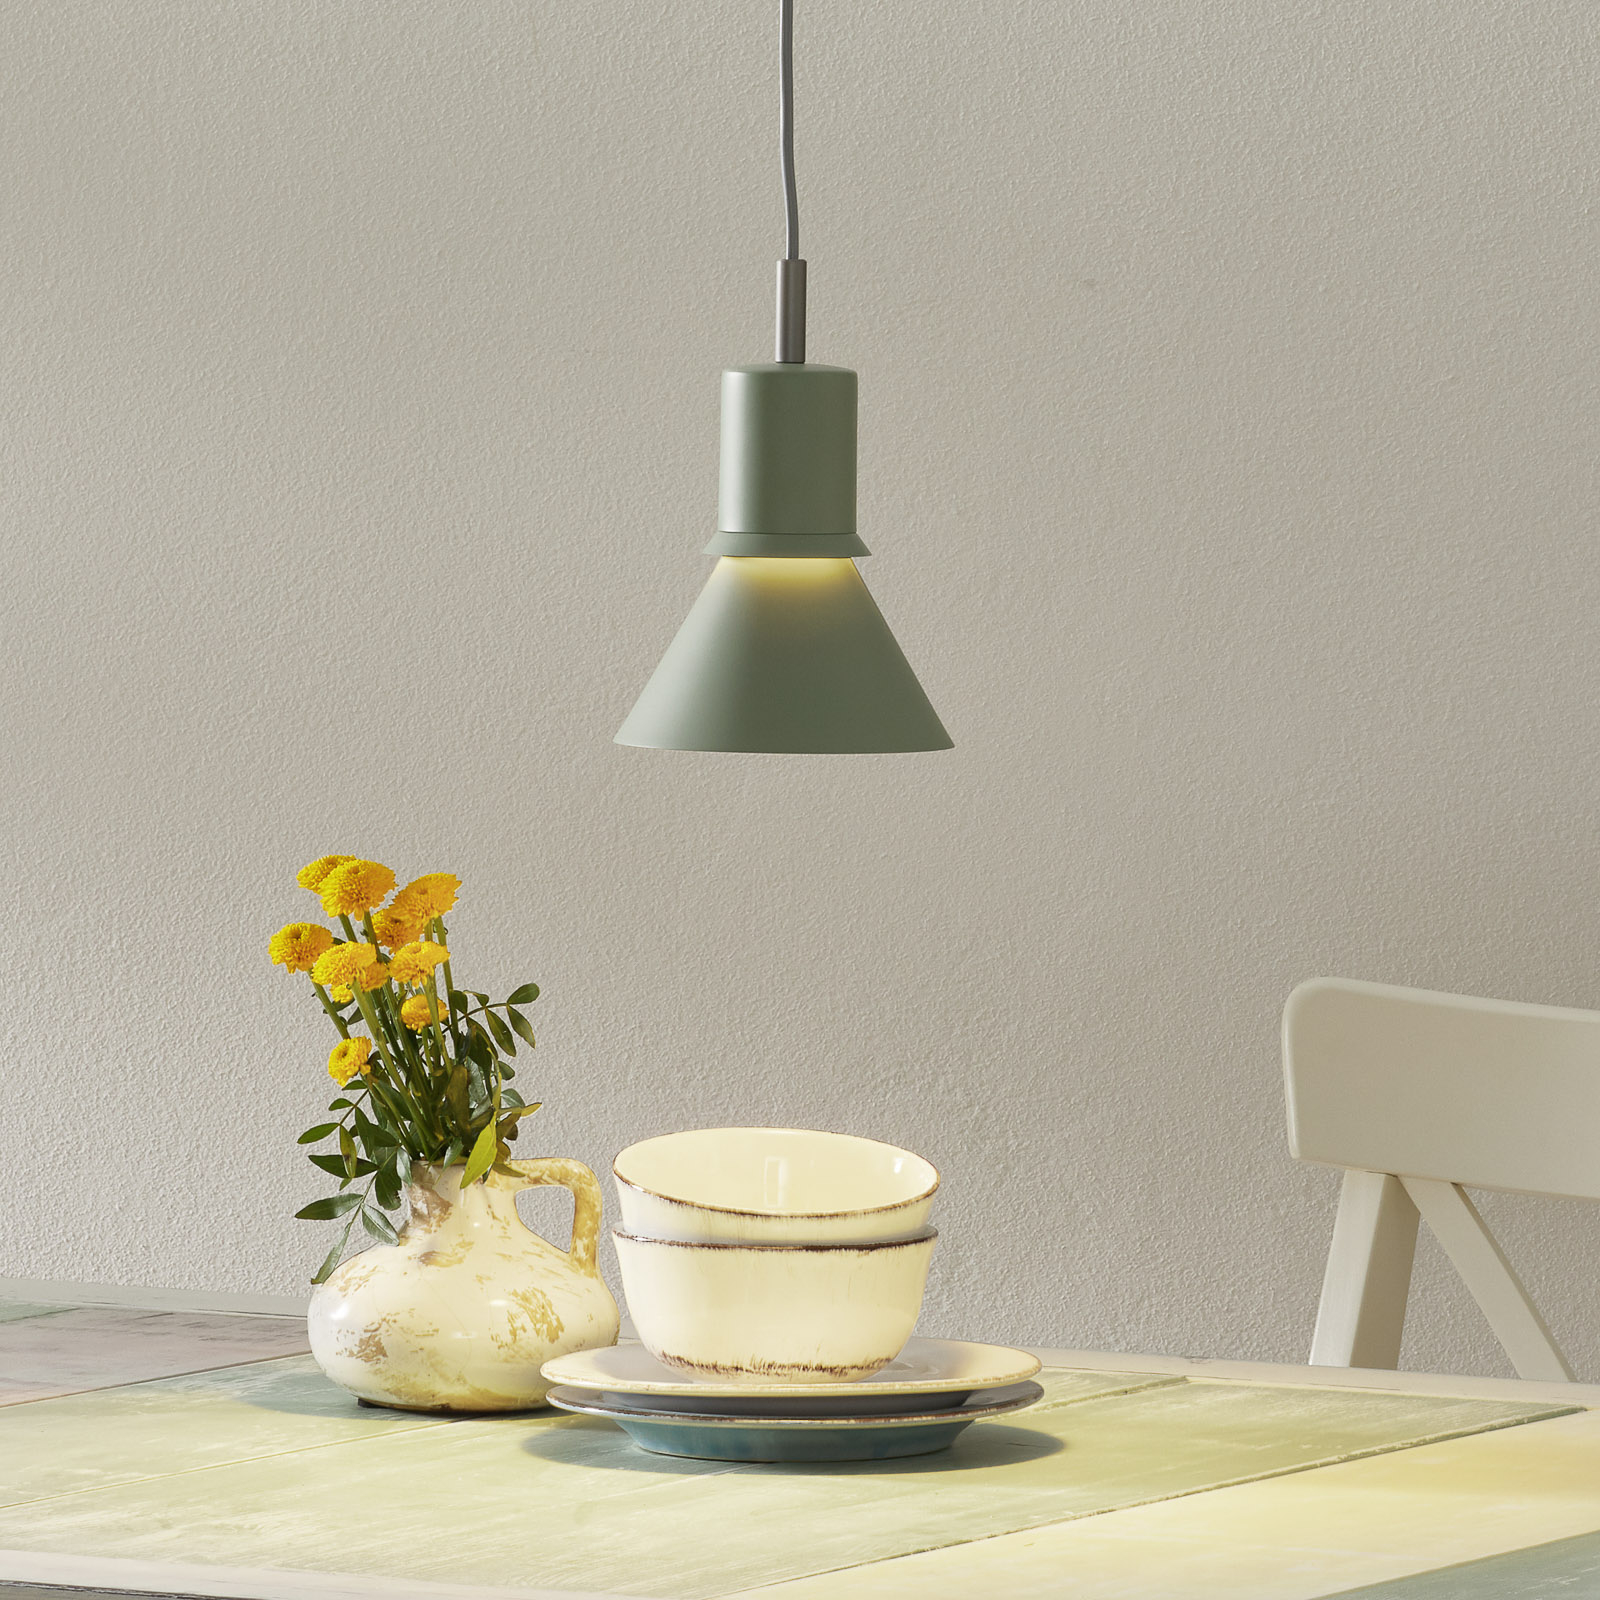 Anglepoise Type 80 hanging light, pistachio green